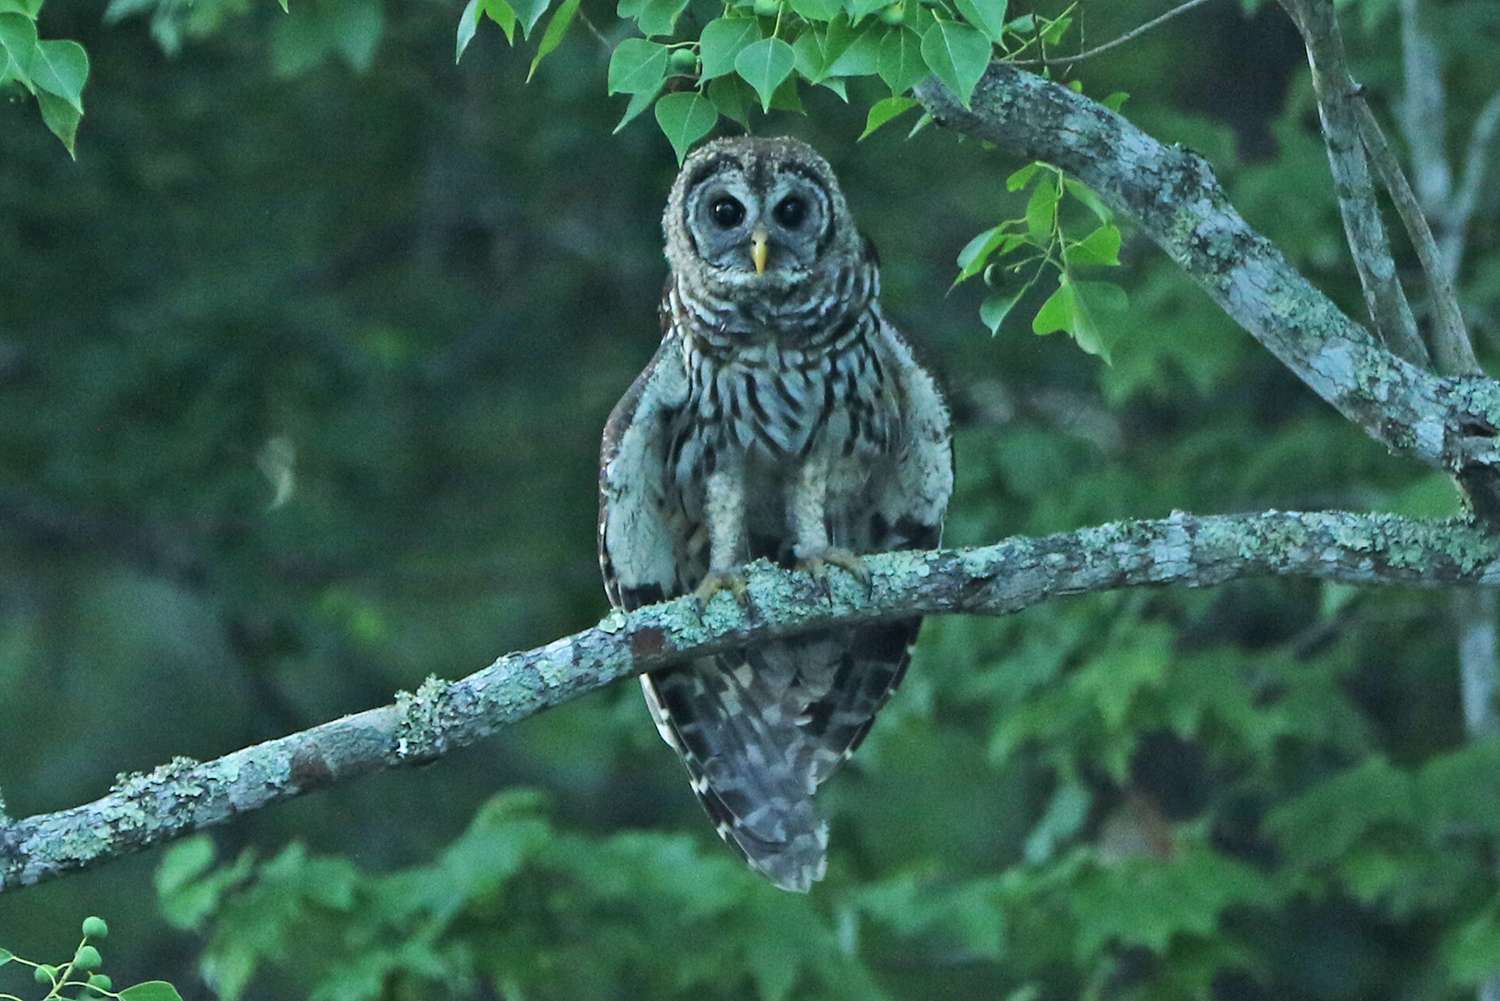 Barred owl at Sabine River, 2018. Who Cooks For You Who Cooks For You All? #thosethatknowknow